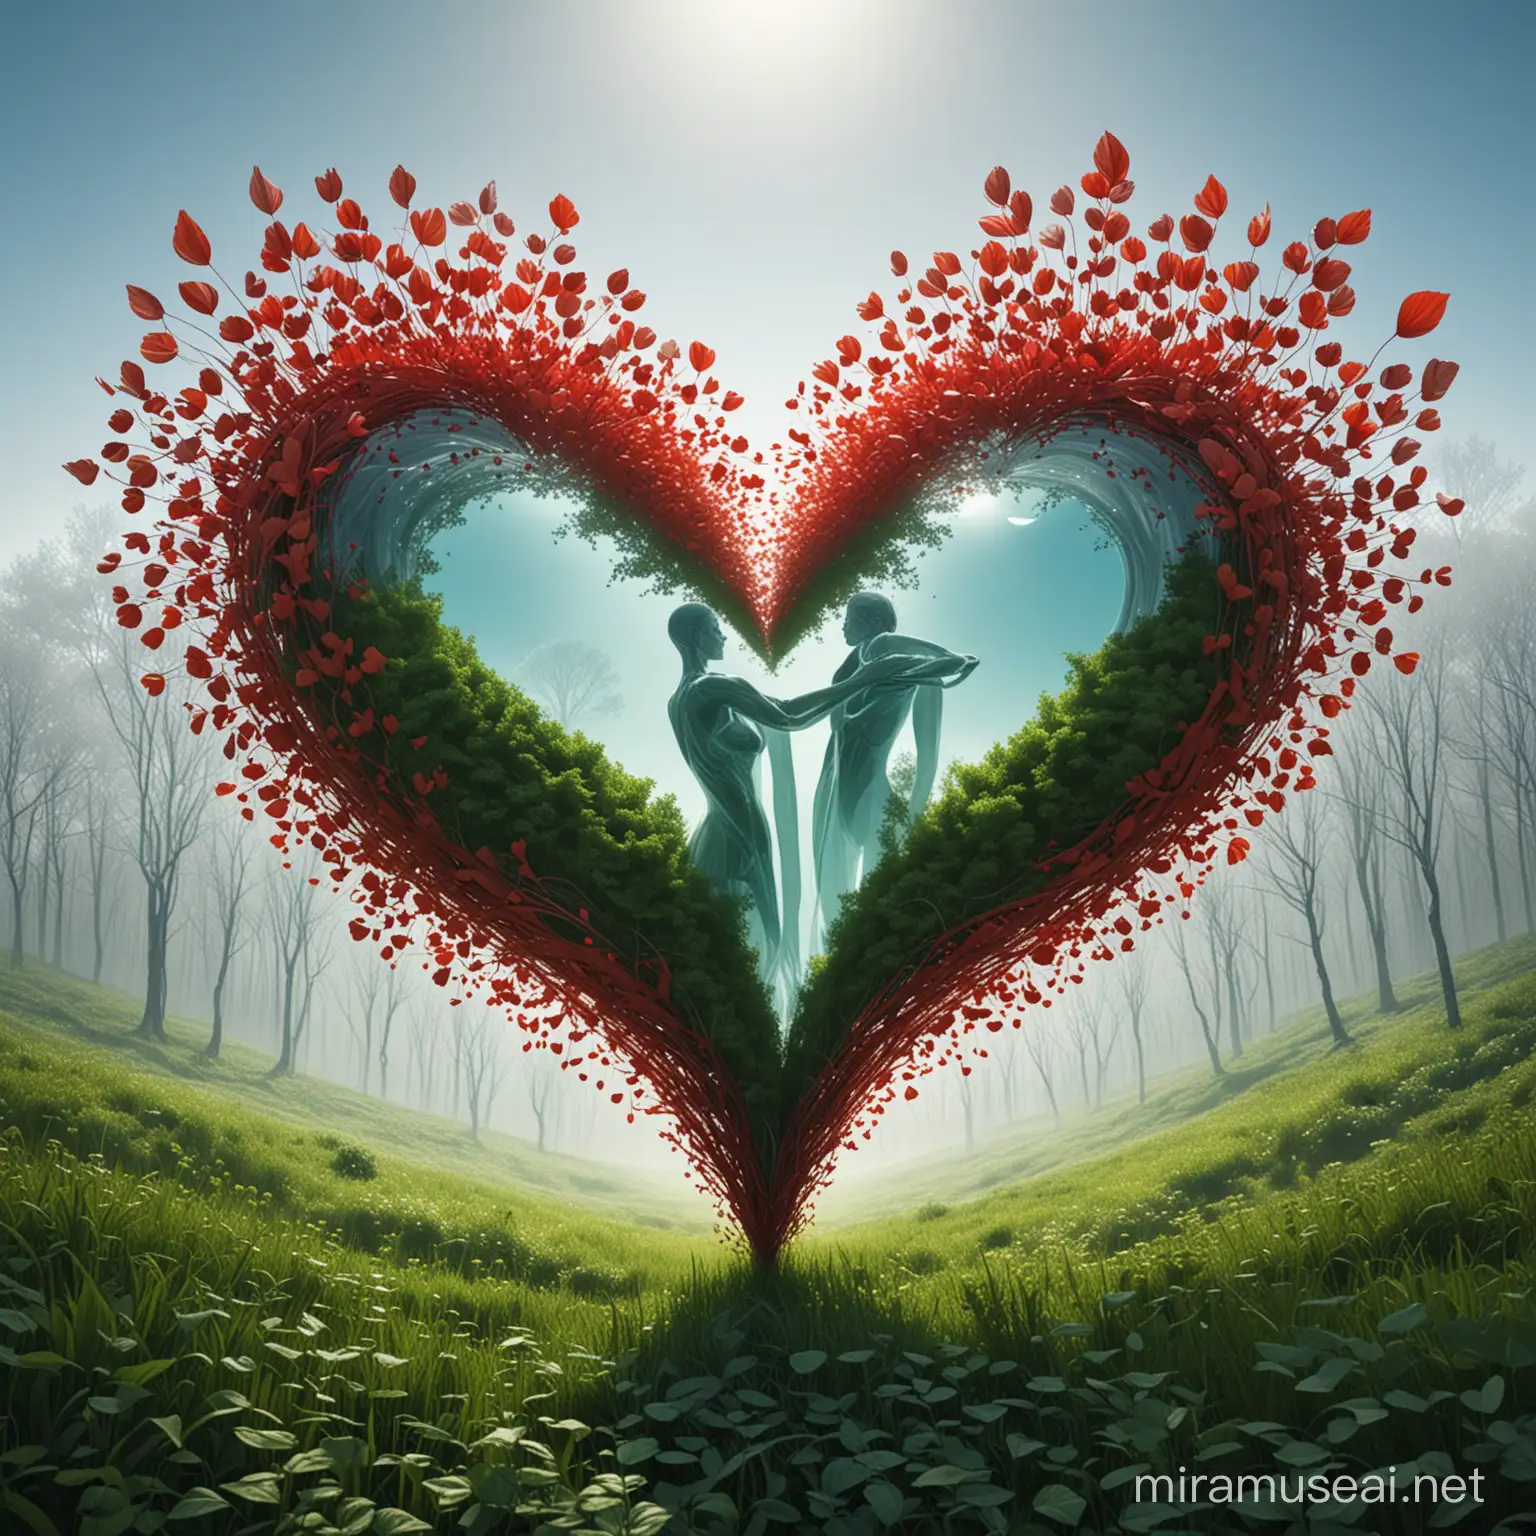 Create a stylized image that creatively merges the concepts of love and nature. The artwork should feature two green figures with a modern, abstract design. They form a heart shape with their bodies as they reach upward and their heads lean towards each other, evoking a sense of connection and intimacy. The figures' arms should extend into the shape of leaves, further emphasizing their bond with nature. The heart they create is a glossy, vibrant red, appearing almost translucent, with a soft shadow that gives depth to the image. The background is a gentle gradient from light blue at the top to white at the bottom, suggesting a peaceful sky. The overall style is sleek and contemporary, with smooth lines and a minimalist aesthetic, 32k render, hyperrealistic, detailed..